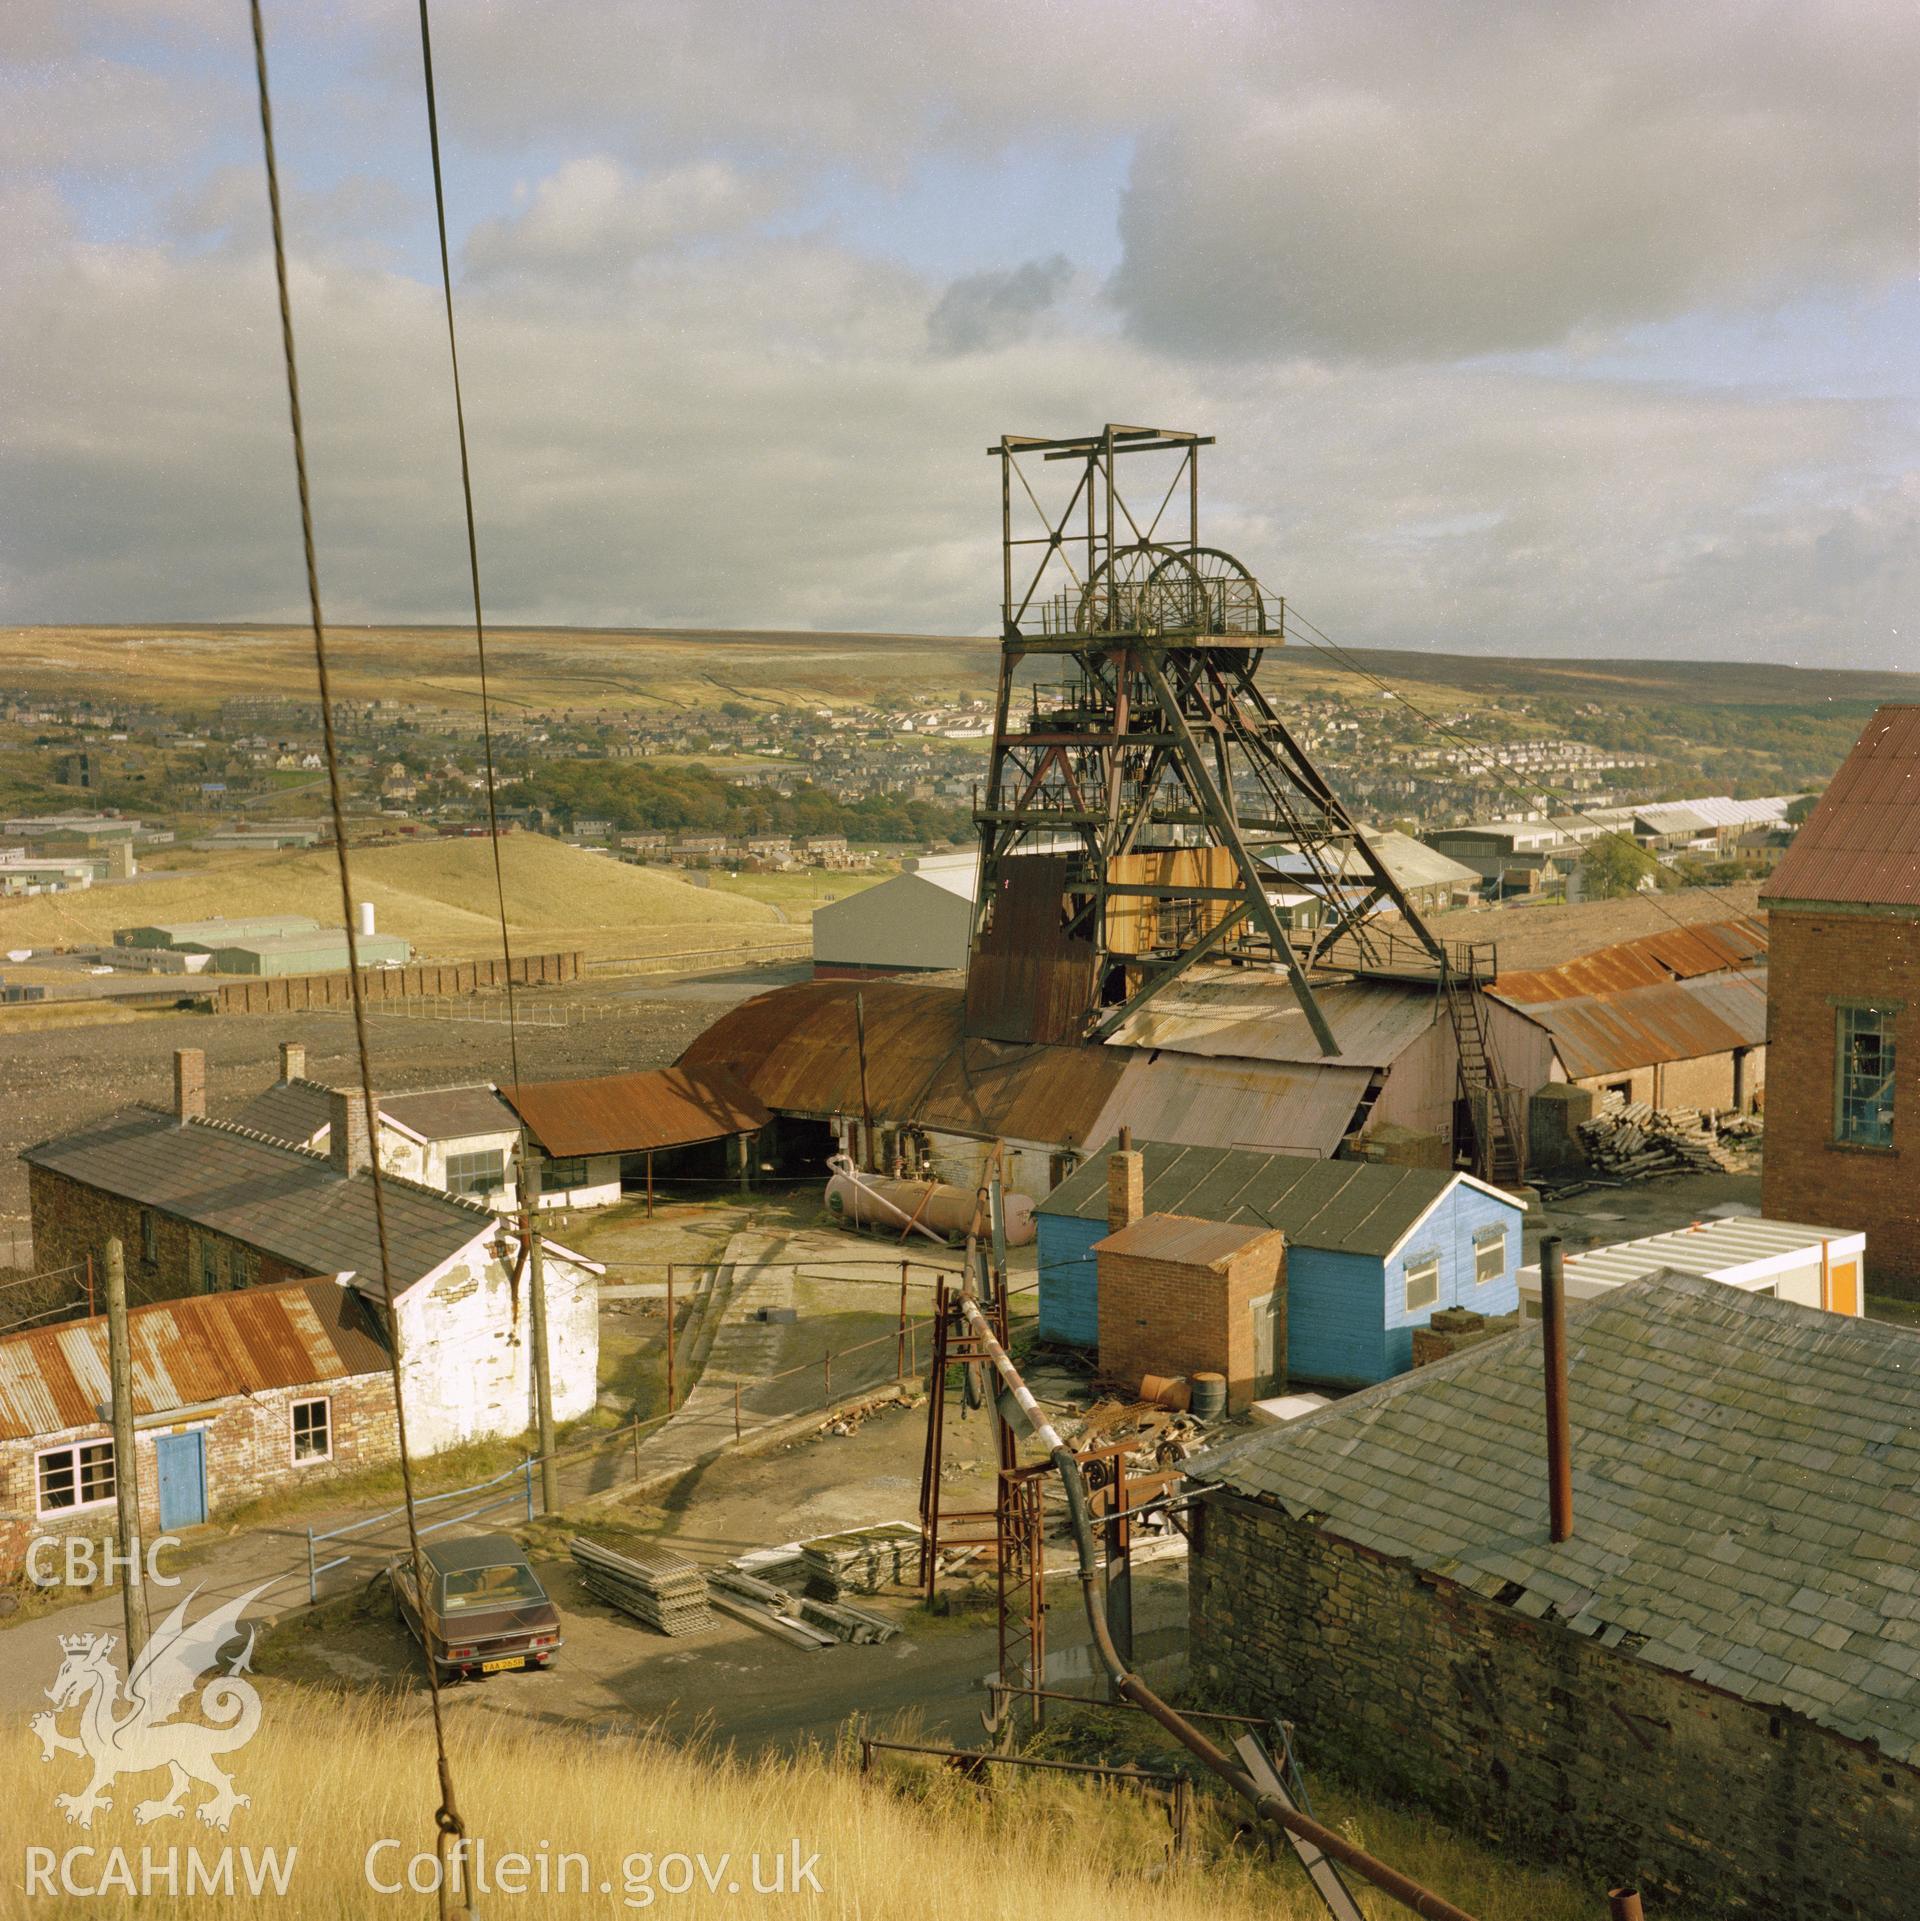 Digital copy of an acetate negative showing view looking down on the pit head (pre museum) at Big Pit, from the John Cornwell Collection.